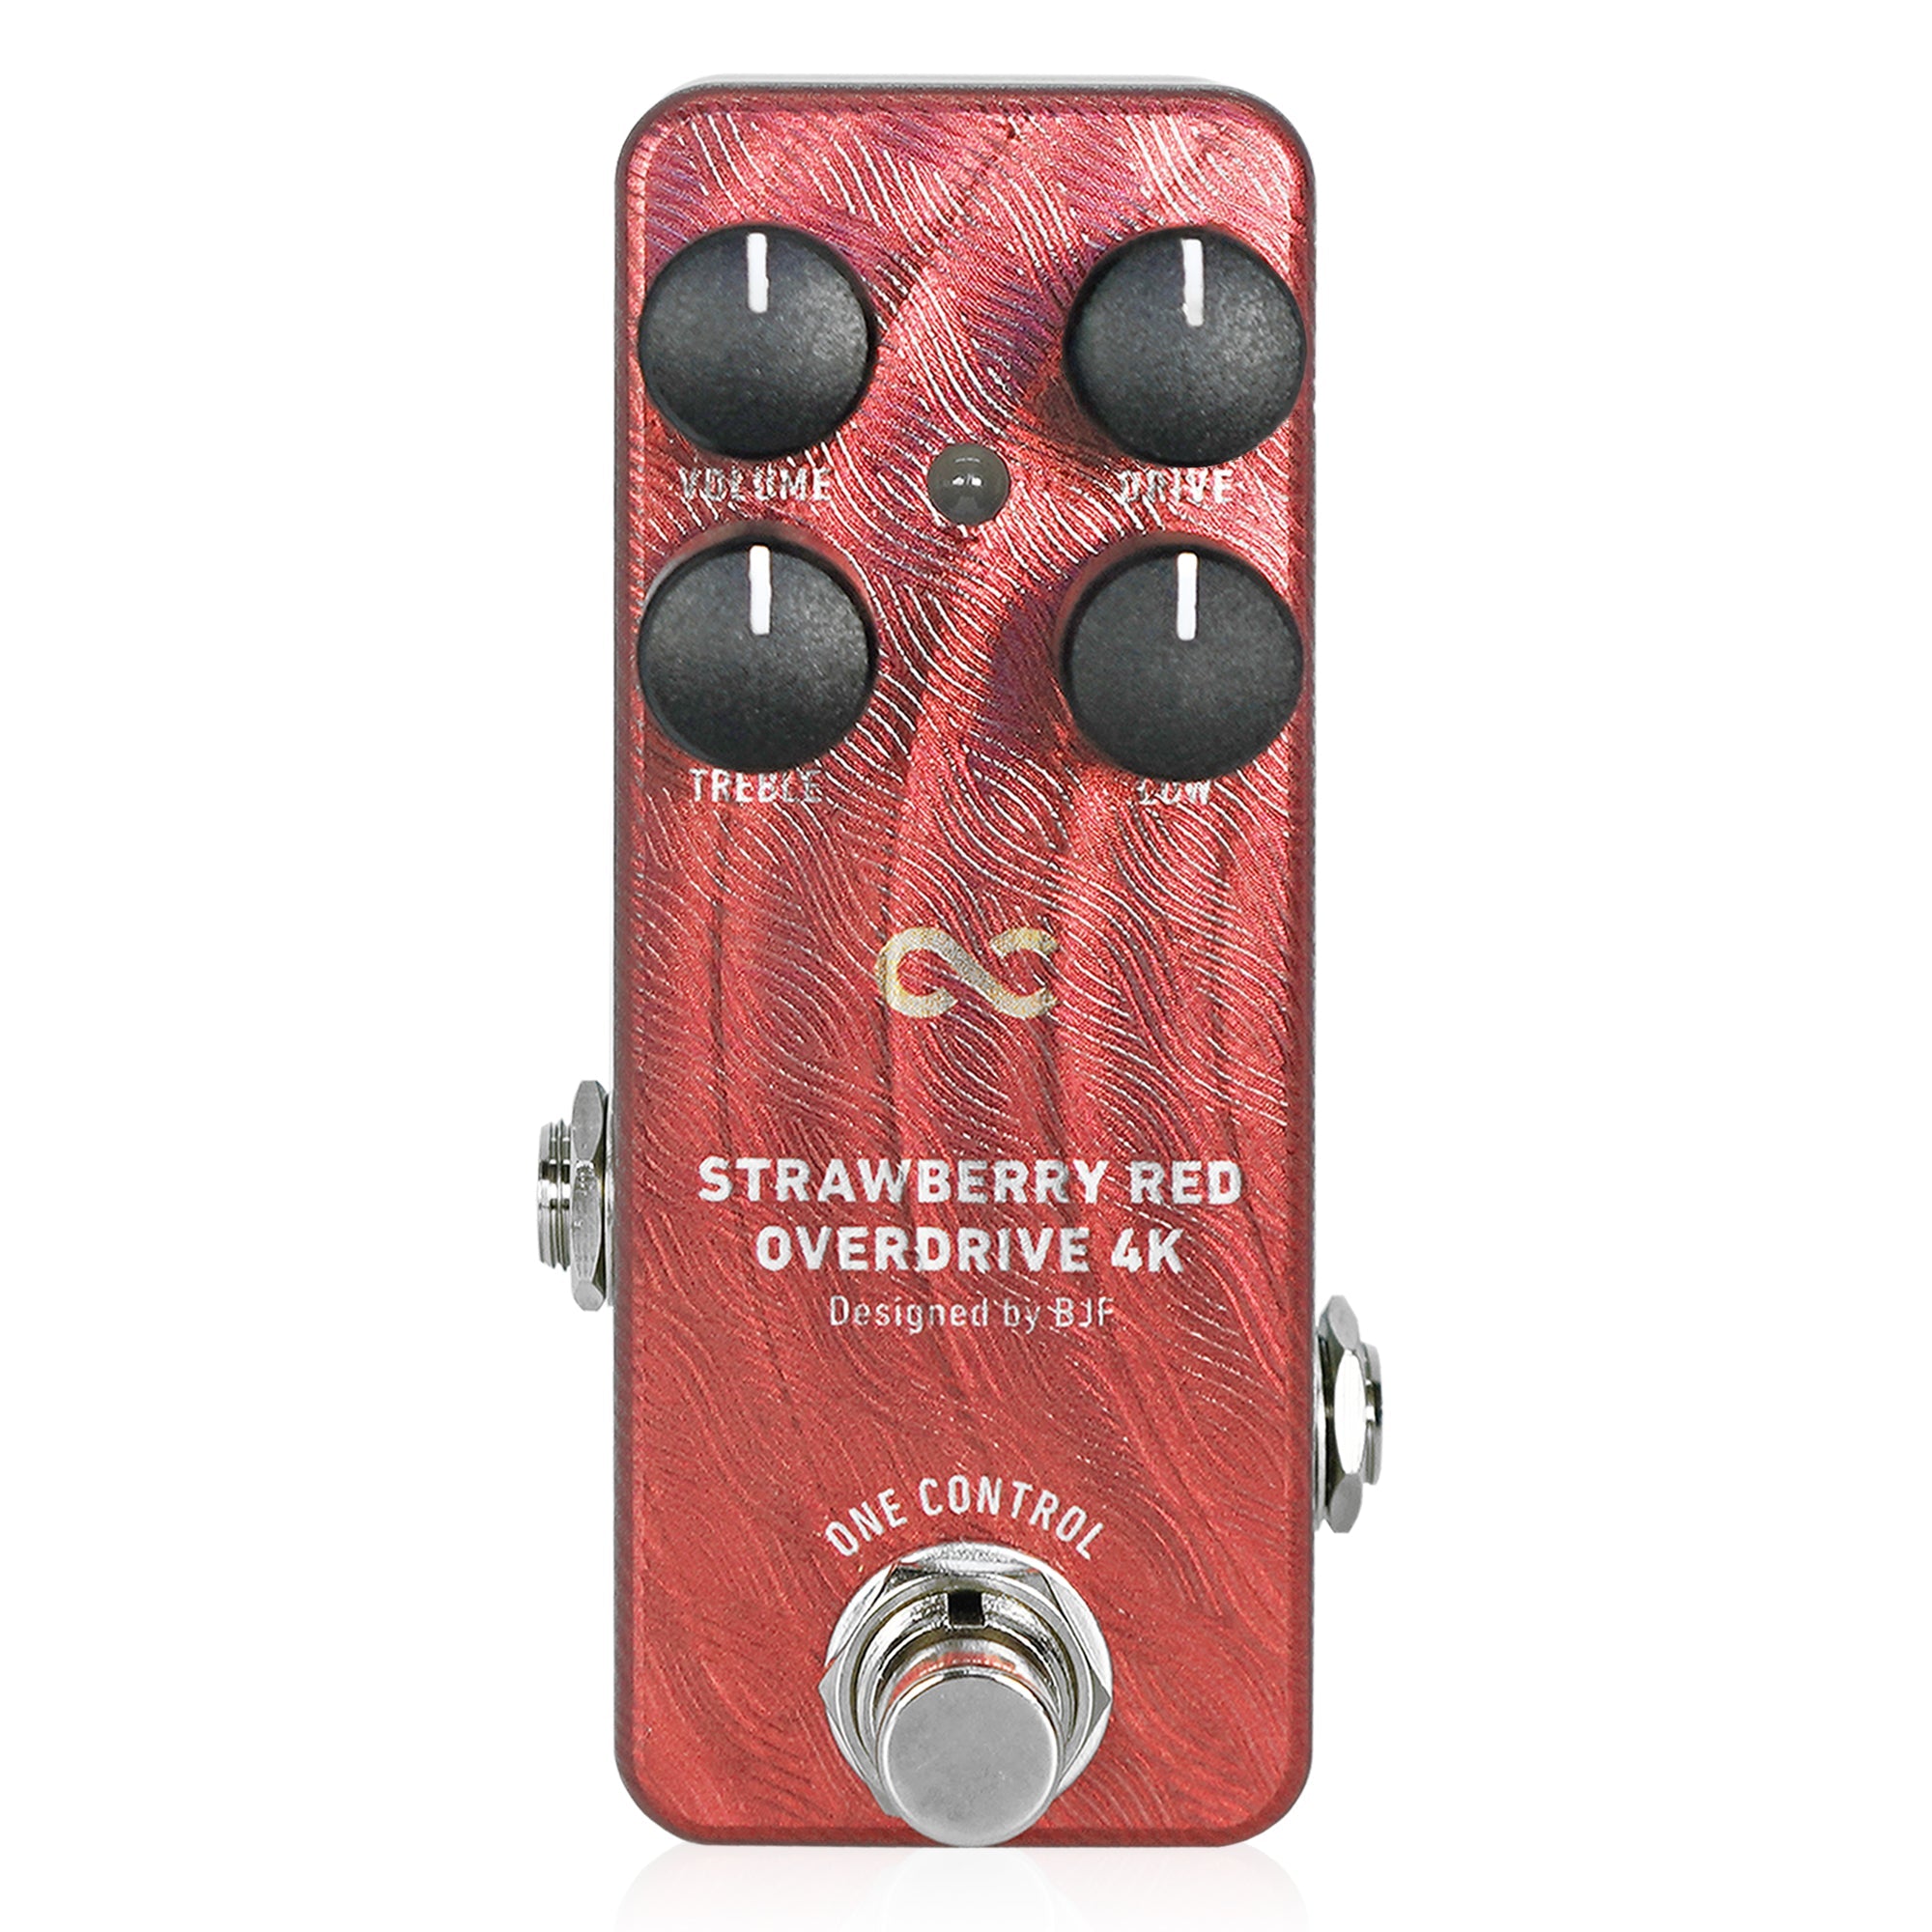 One Control/STRAWBERRY RED OVERDRIVE 4K – LEP INTERNATIONAL